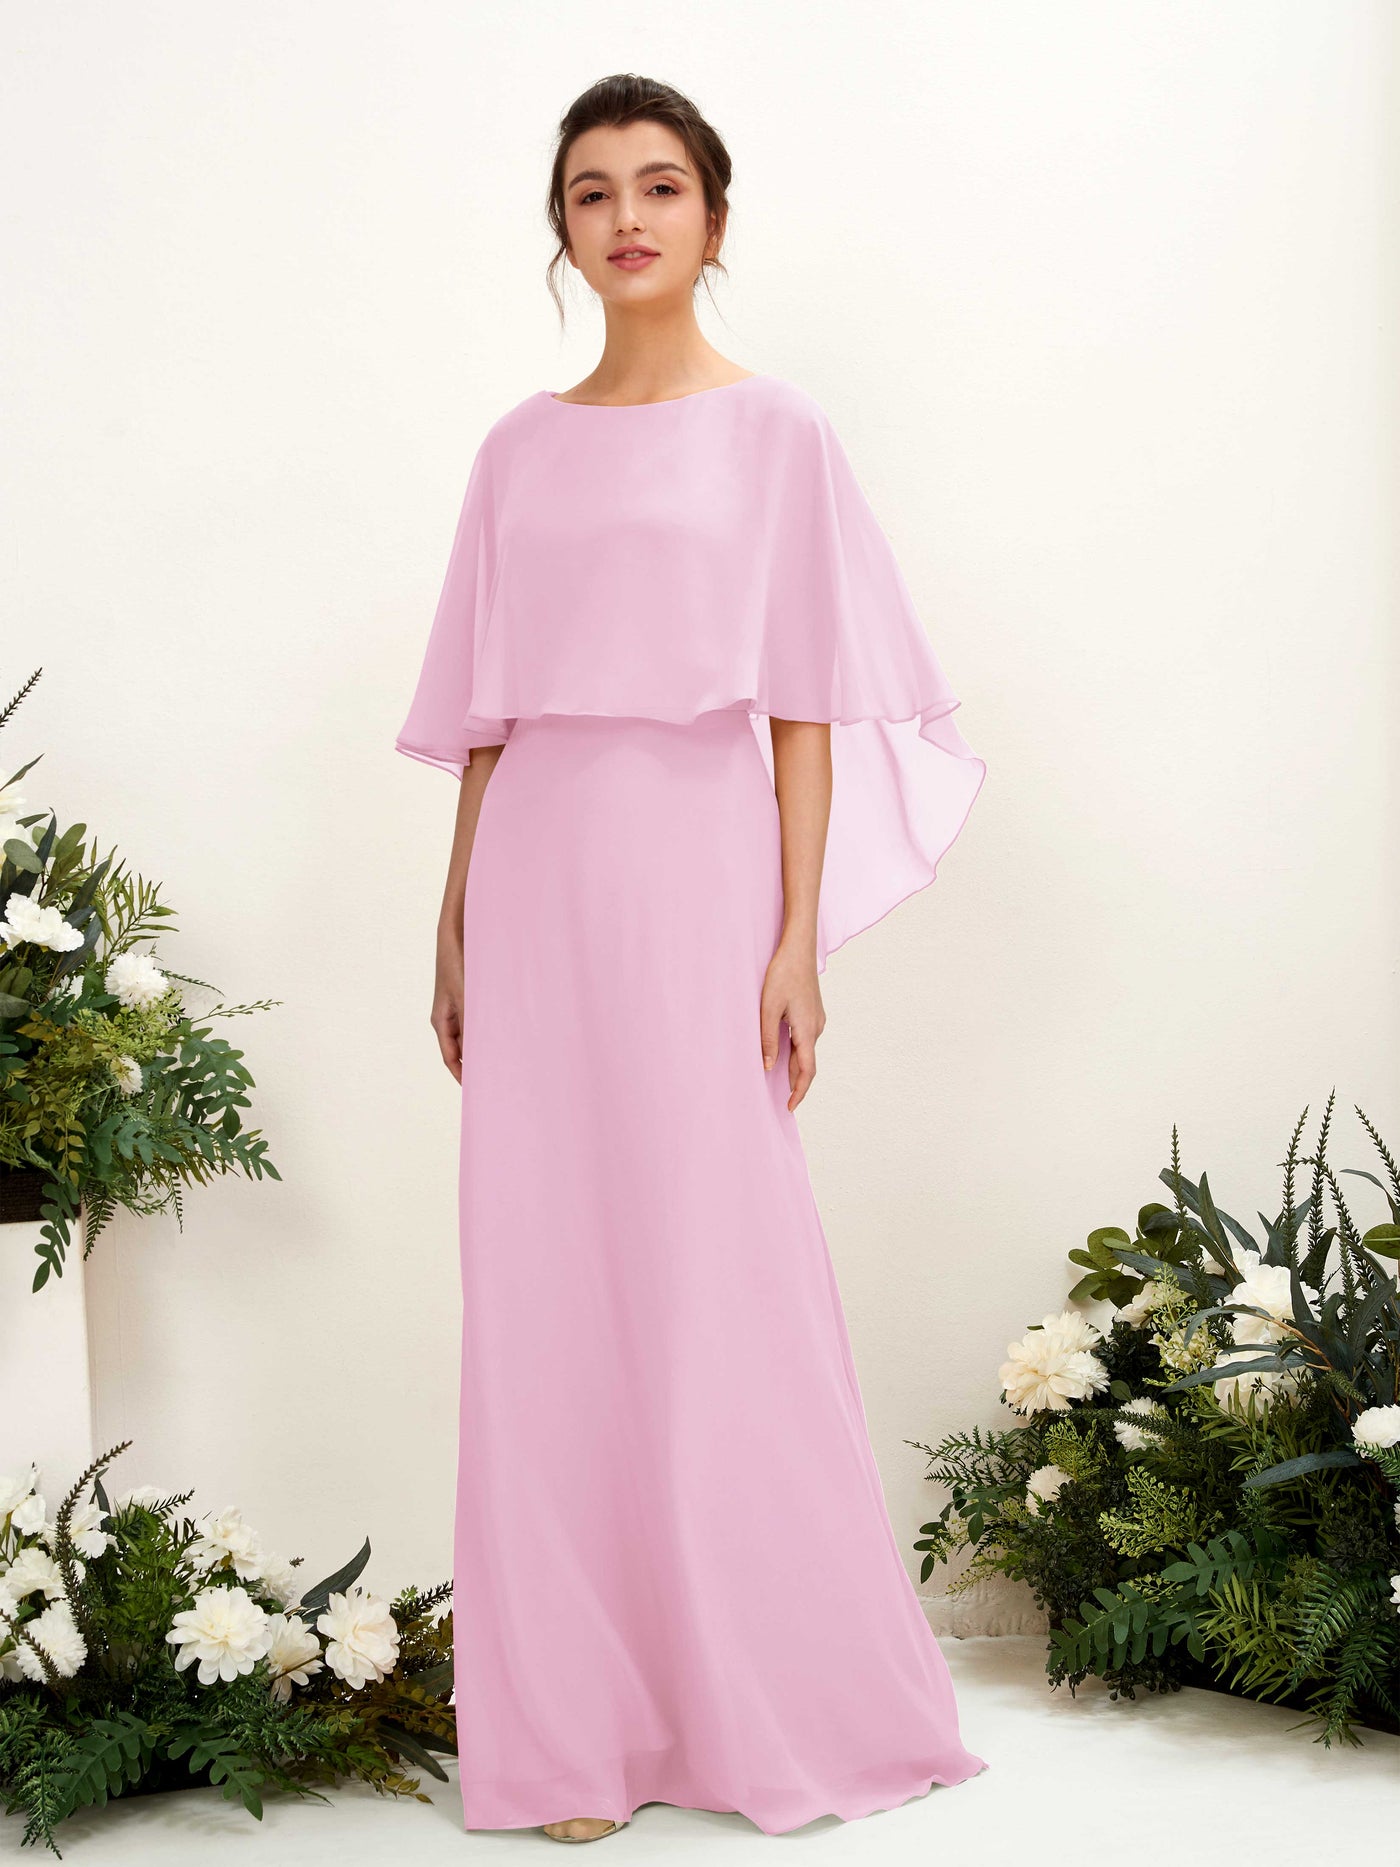 Candy Pink Bridesmaid Dresses Bridesmaid Dress A-line Chiffon Bateau Full Length Sleeveless Wedding Party Dress (81222039)#color_candy-pink